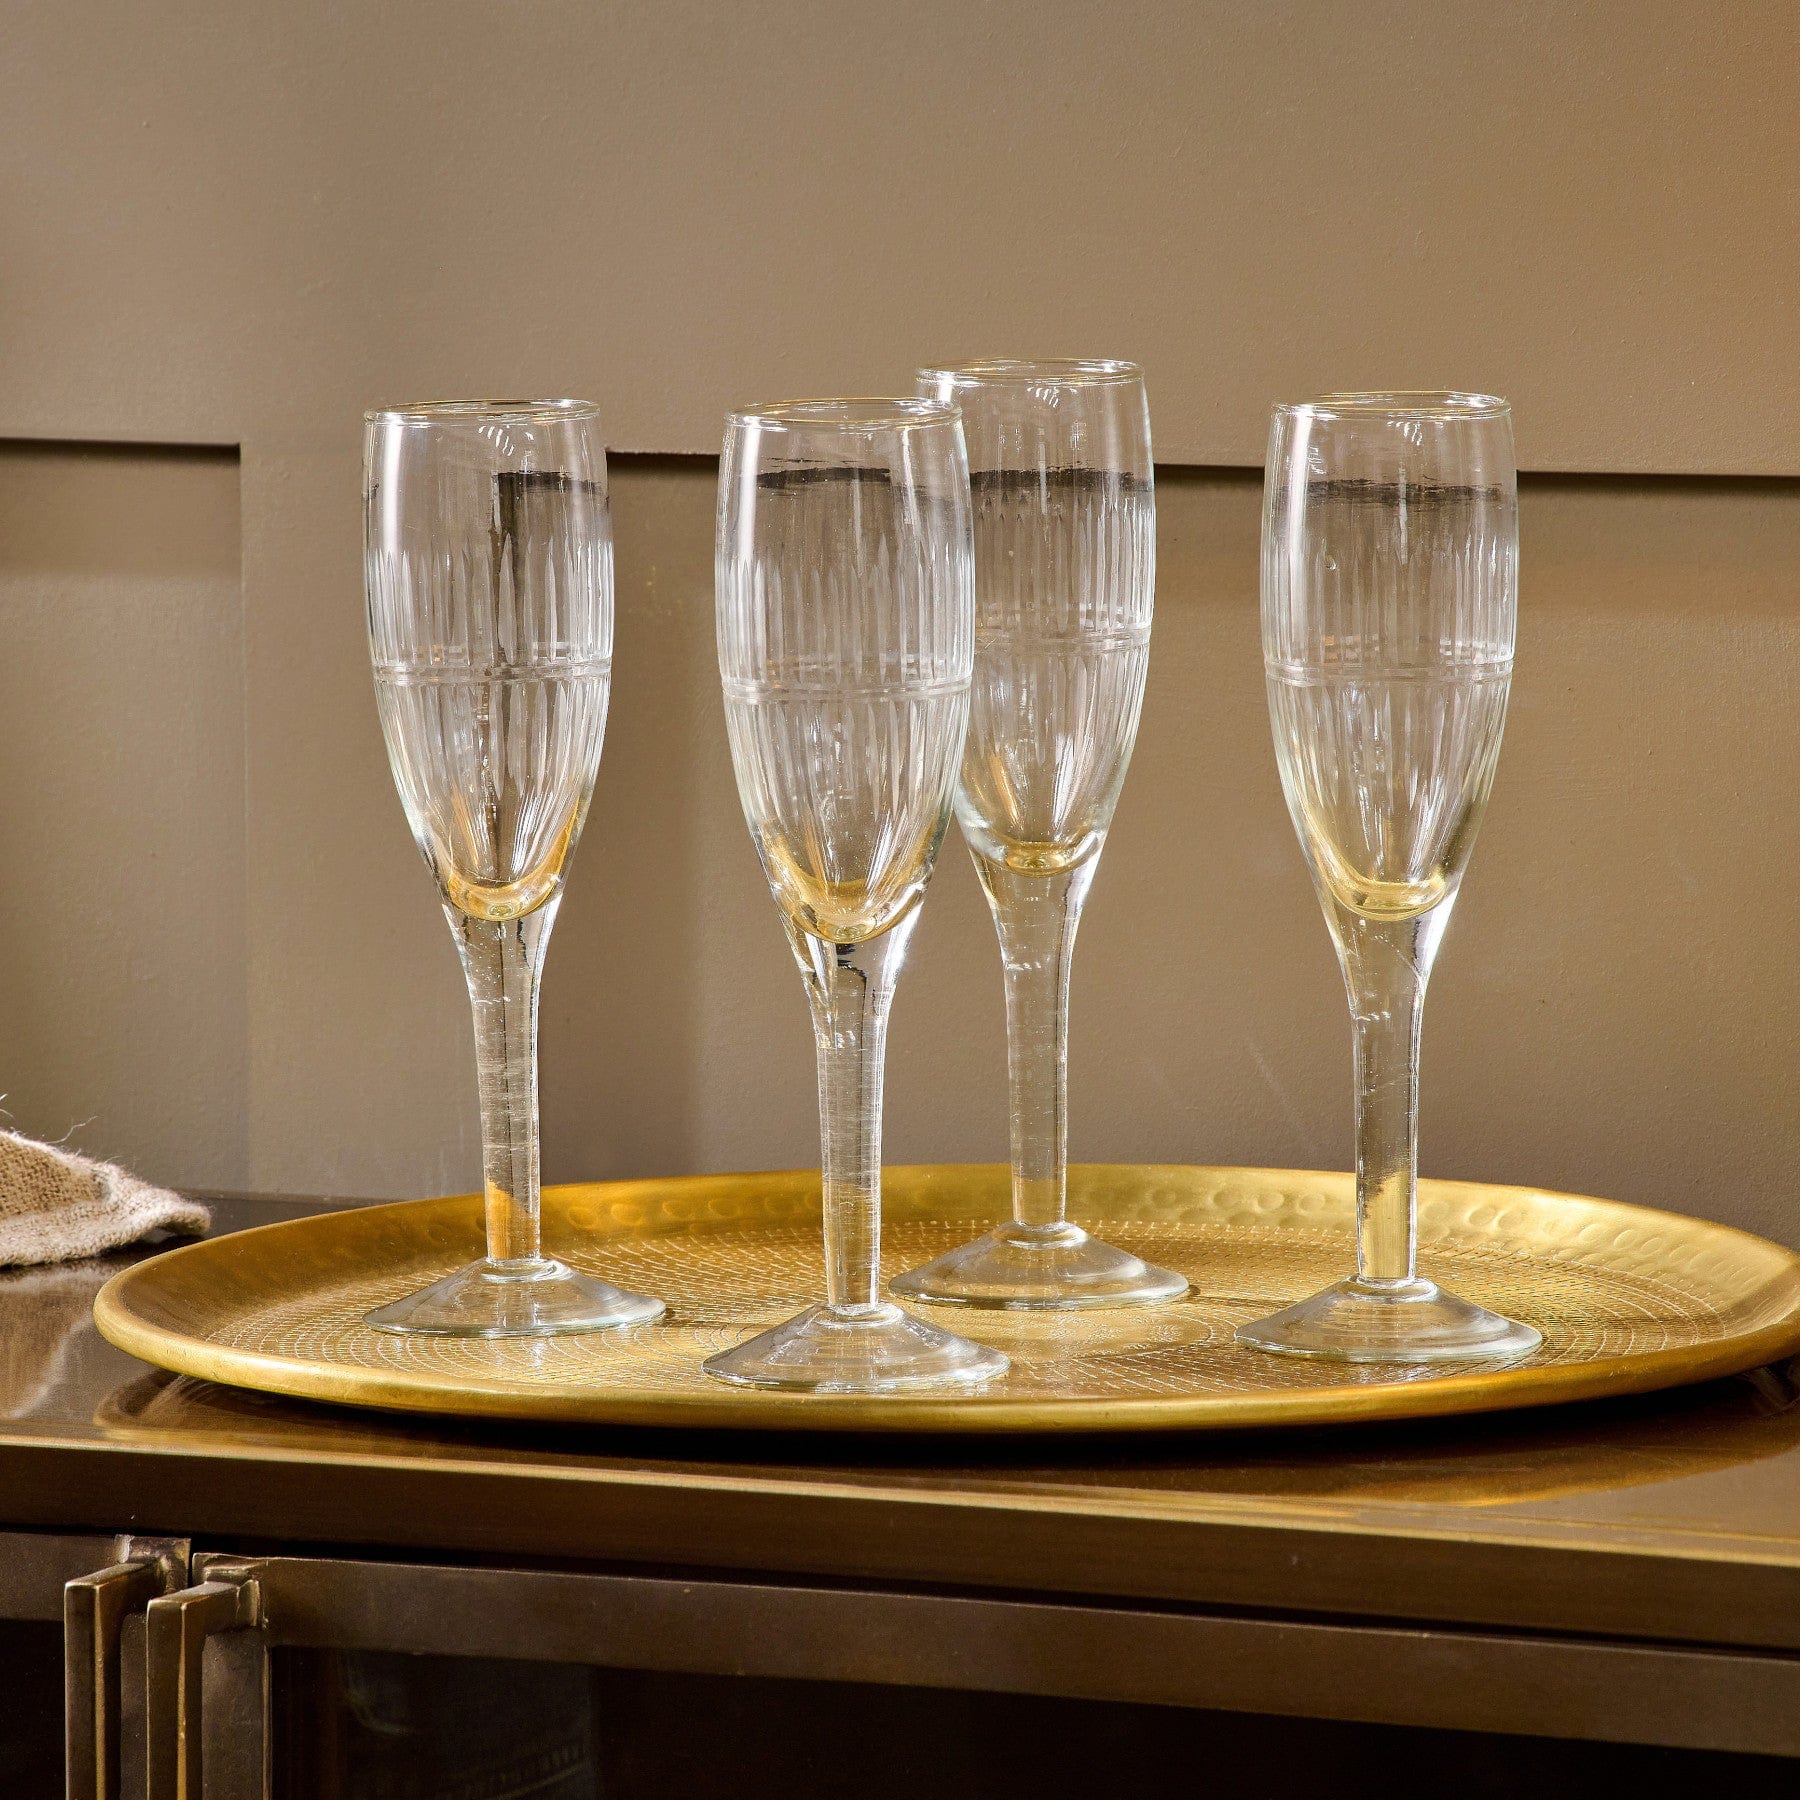 Elegant champagne flutes on a golden tray with subtle reflections, set against a neutral brown background